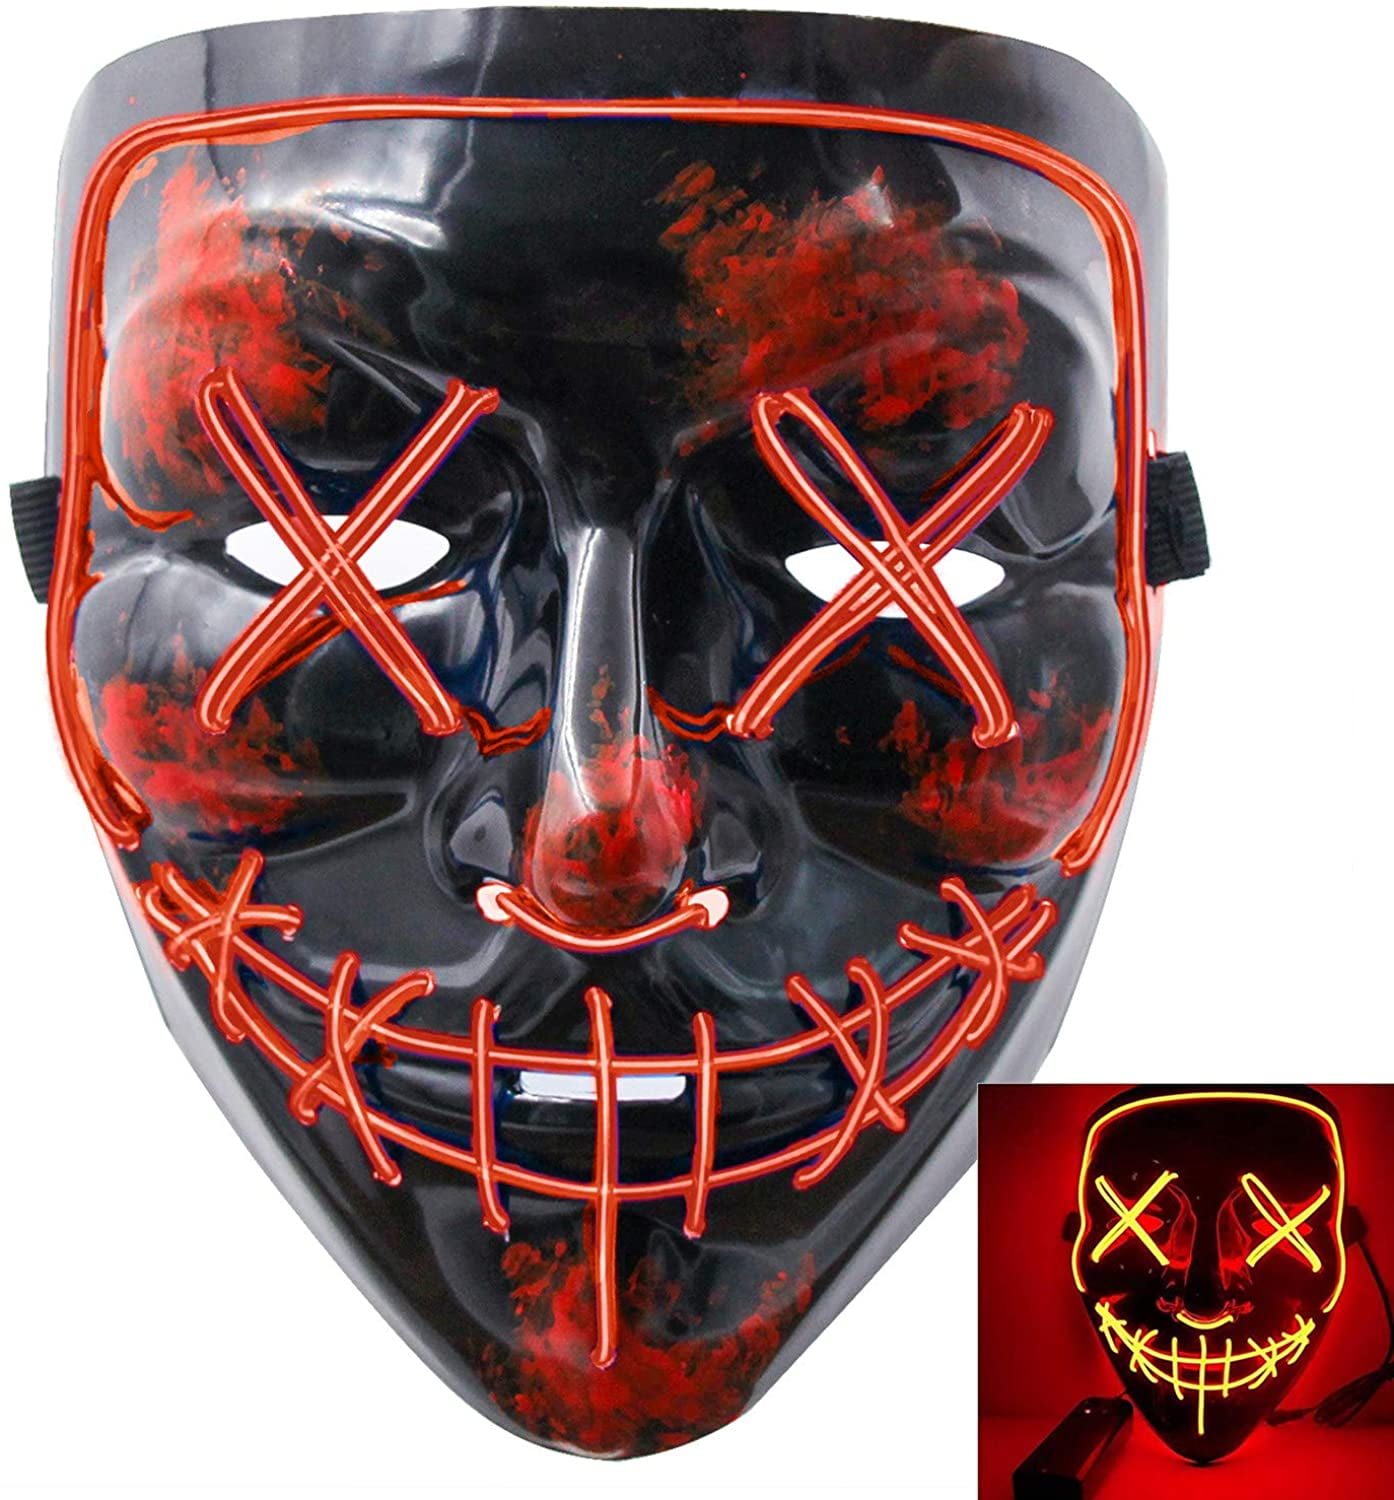 EL Wire Mask Glowing mask for Halloween Festival Party Red Halloween Scary Cosplay Light up Mask LED Halloween Mask 